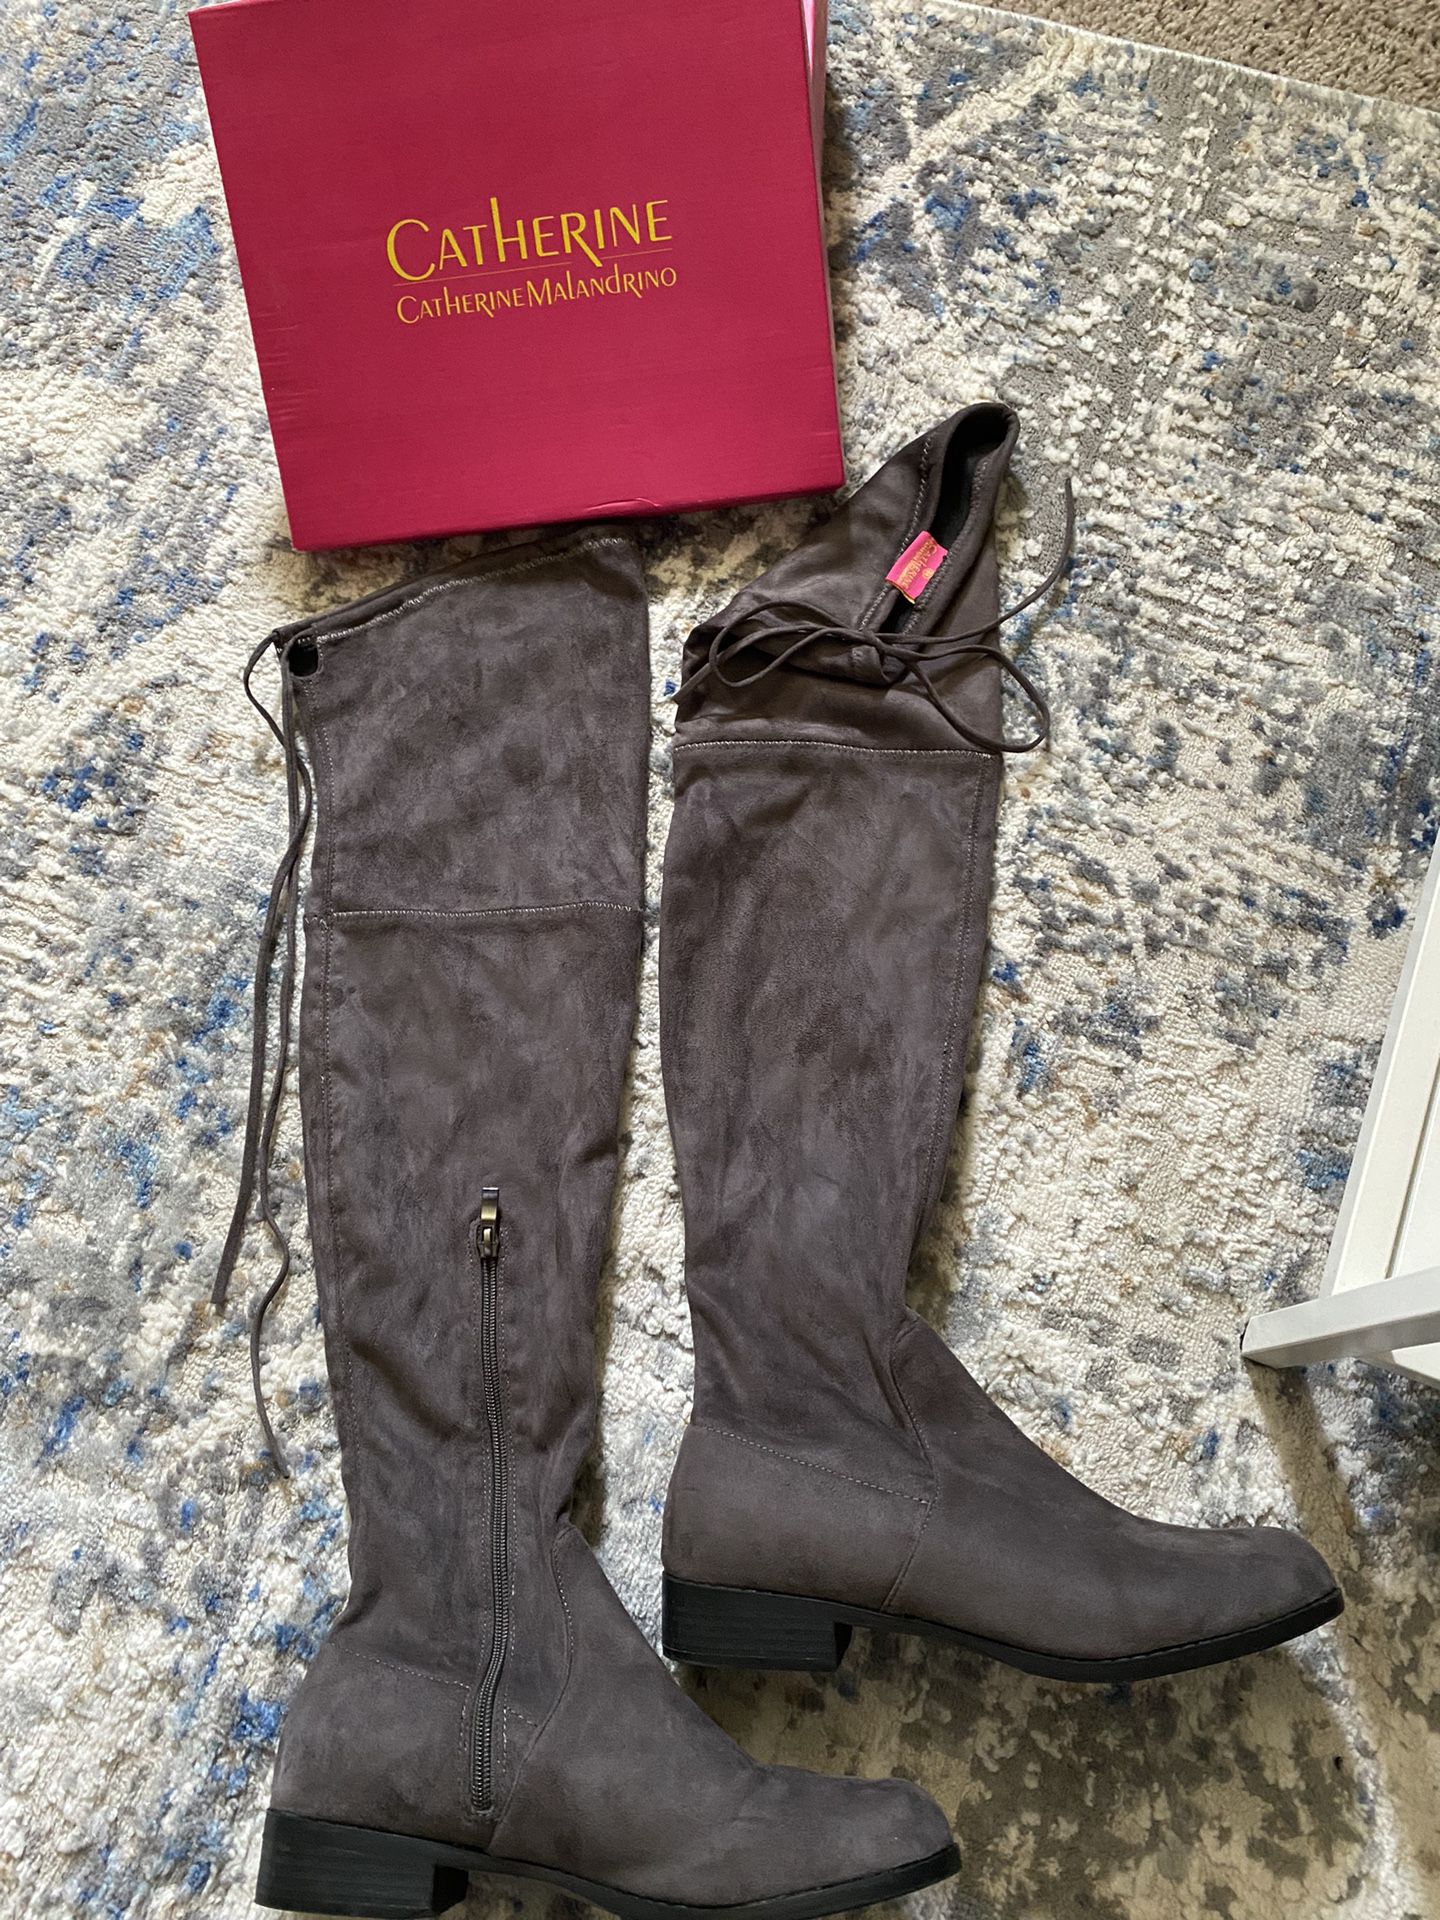 Catherine Malandrino Grey Suede Thigh High Boots Size 8 1/2 